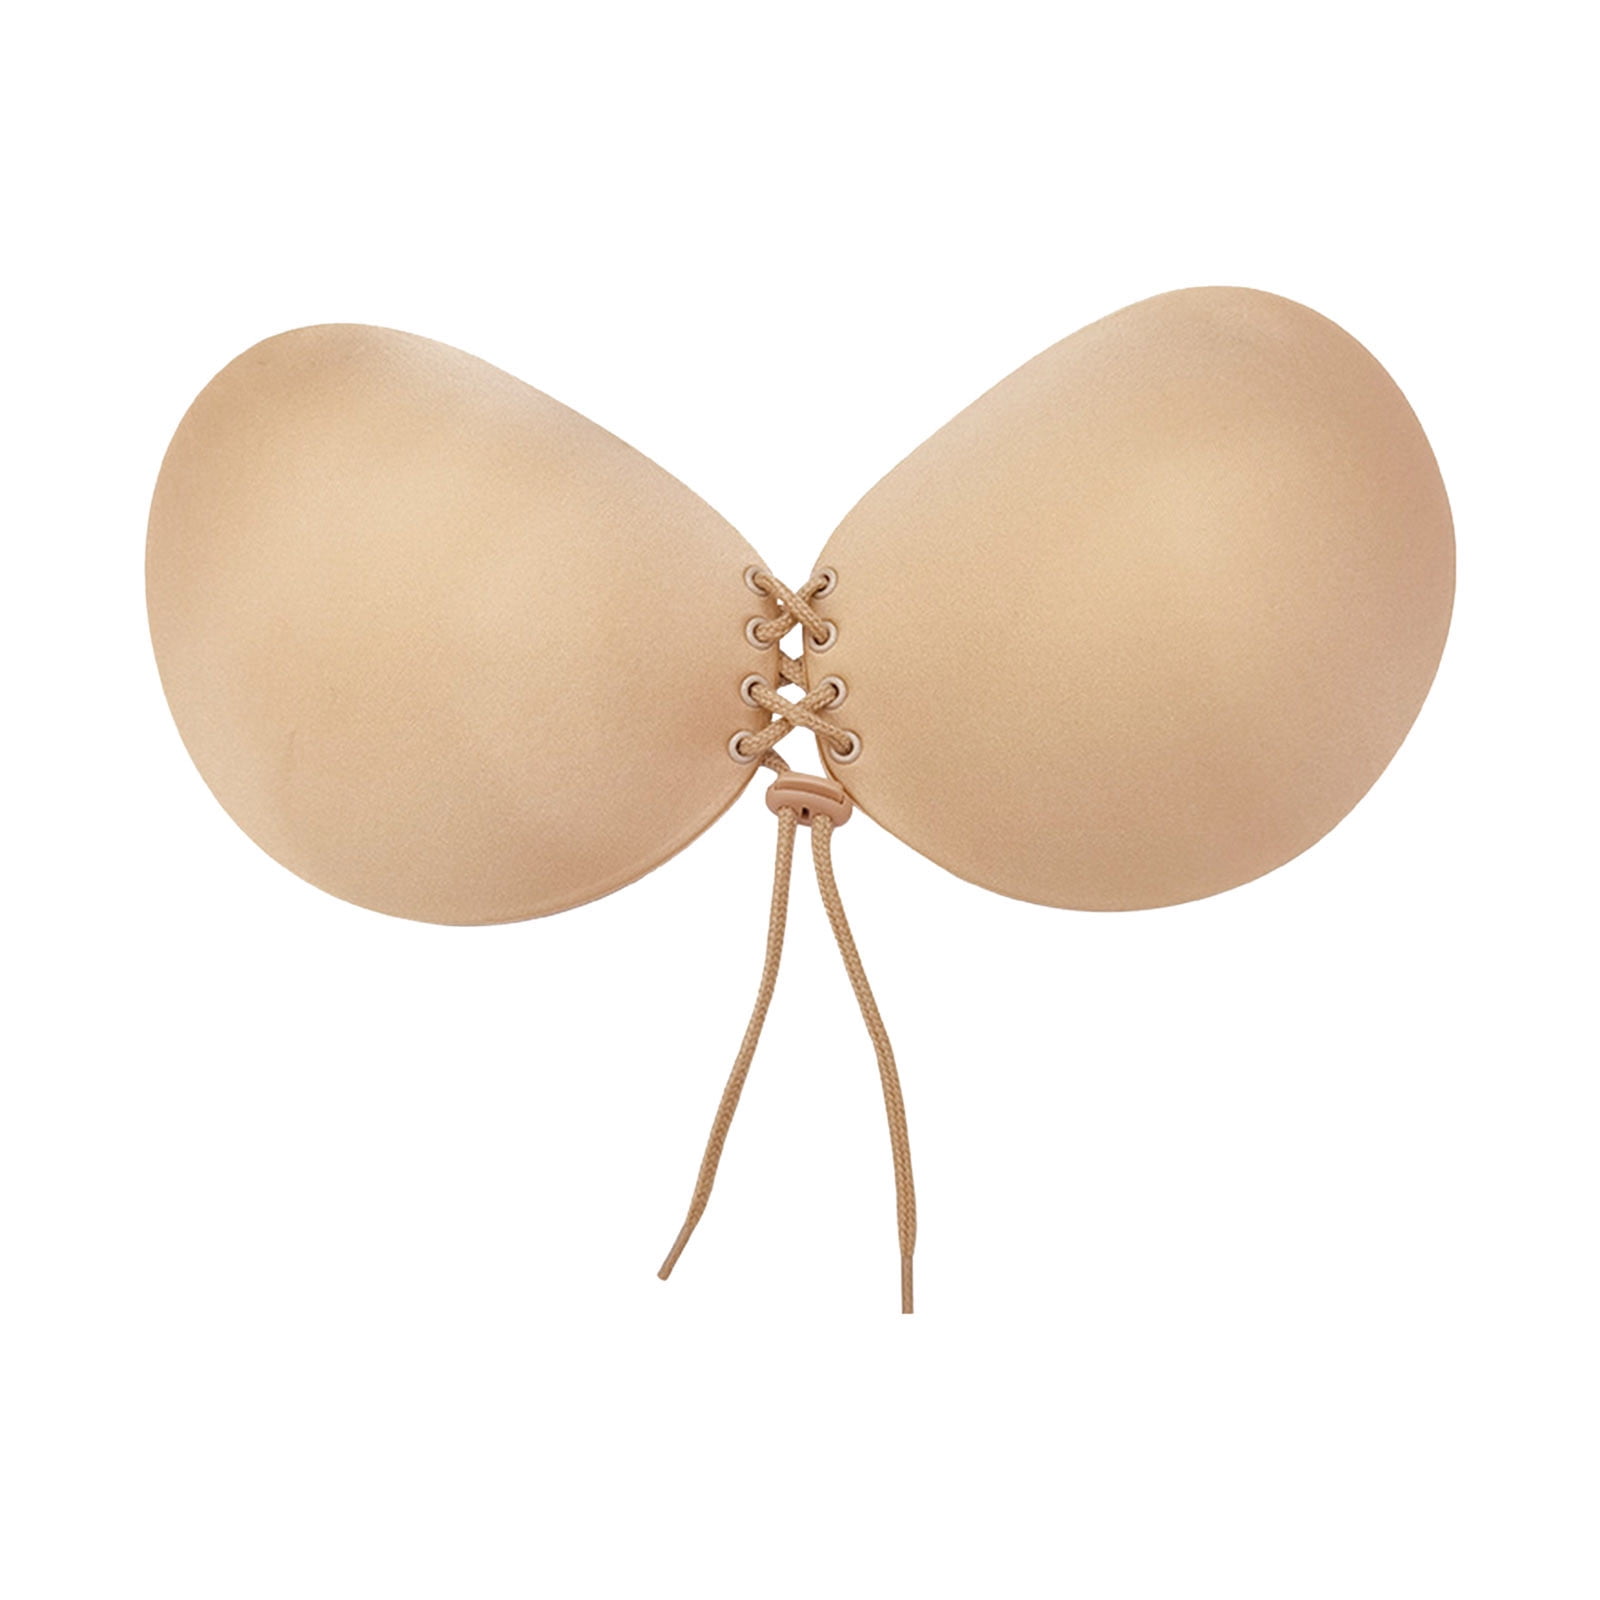 Yeahitch Adhesive Bra Strapless Sticky Invisible Push up Silicone Bra for  Backless Dress with Nipple Covers Nude Beige S 